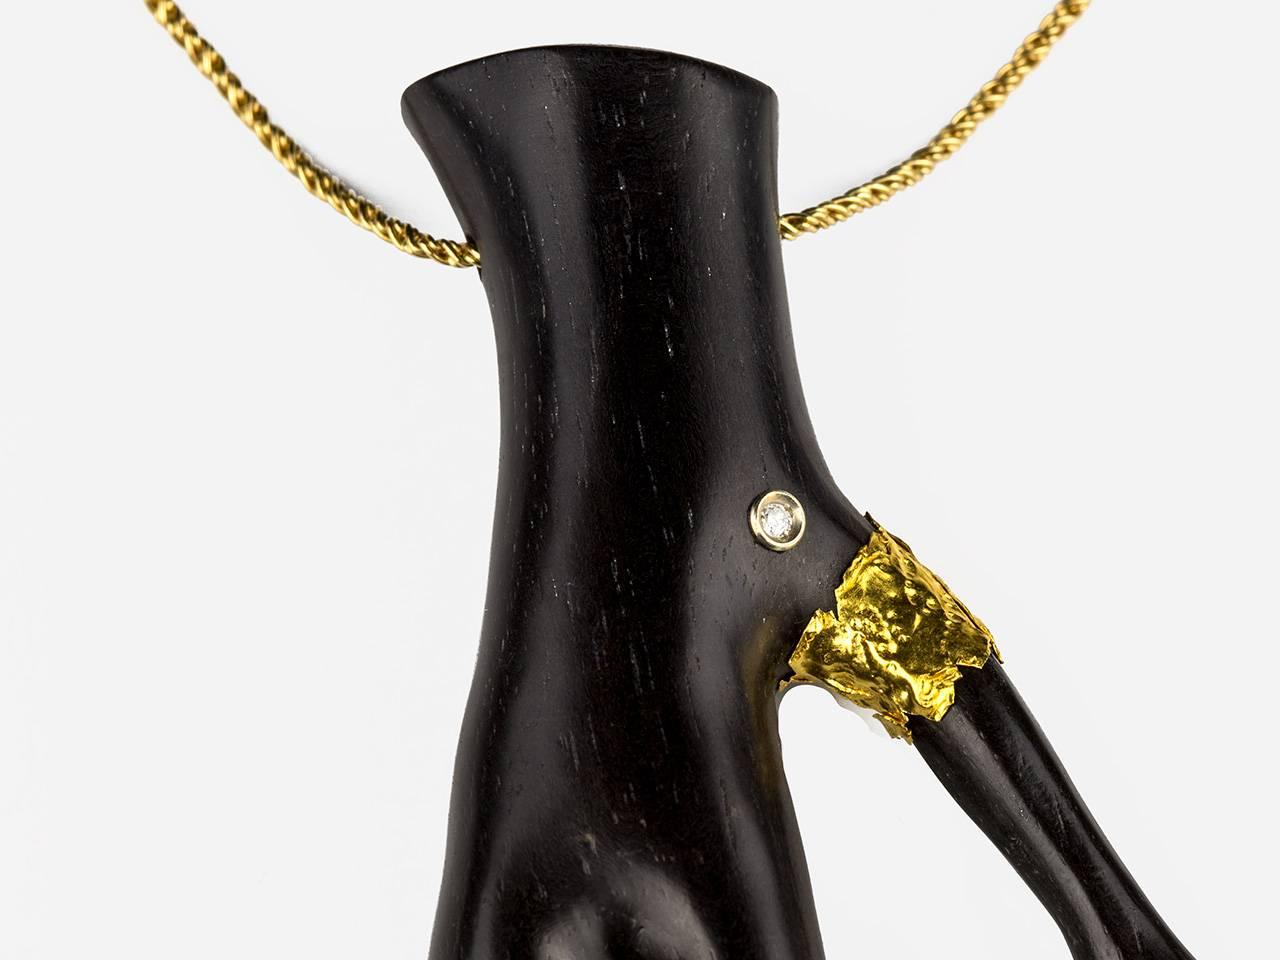 Ebony twig pendant set with diamonds and 18k gold by Federica Rettore. Signed, maker’s mark and 750.